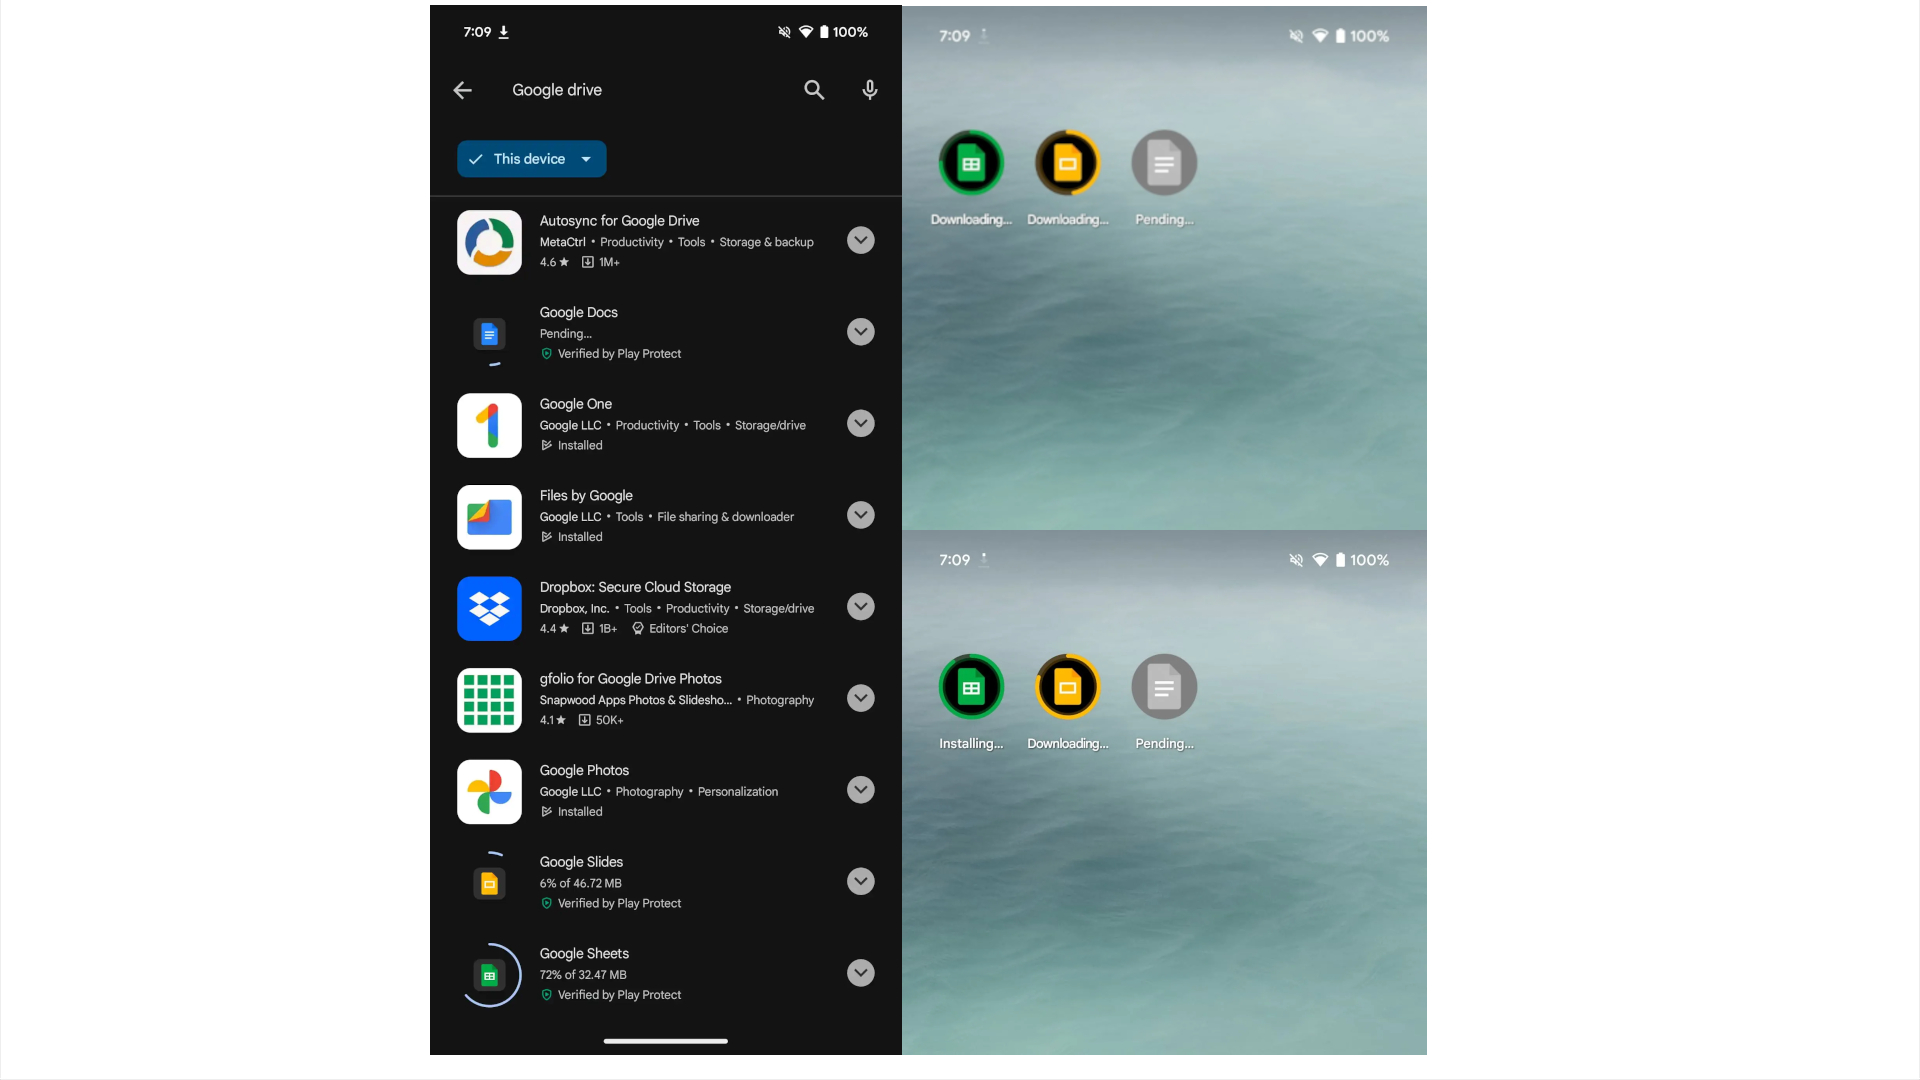 Google Play Store double download screen and home screen